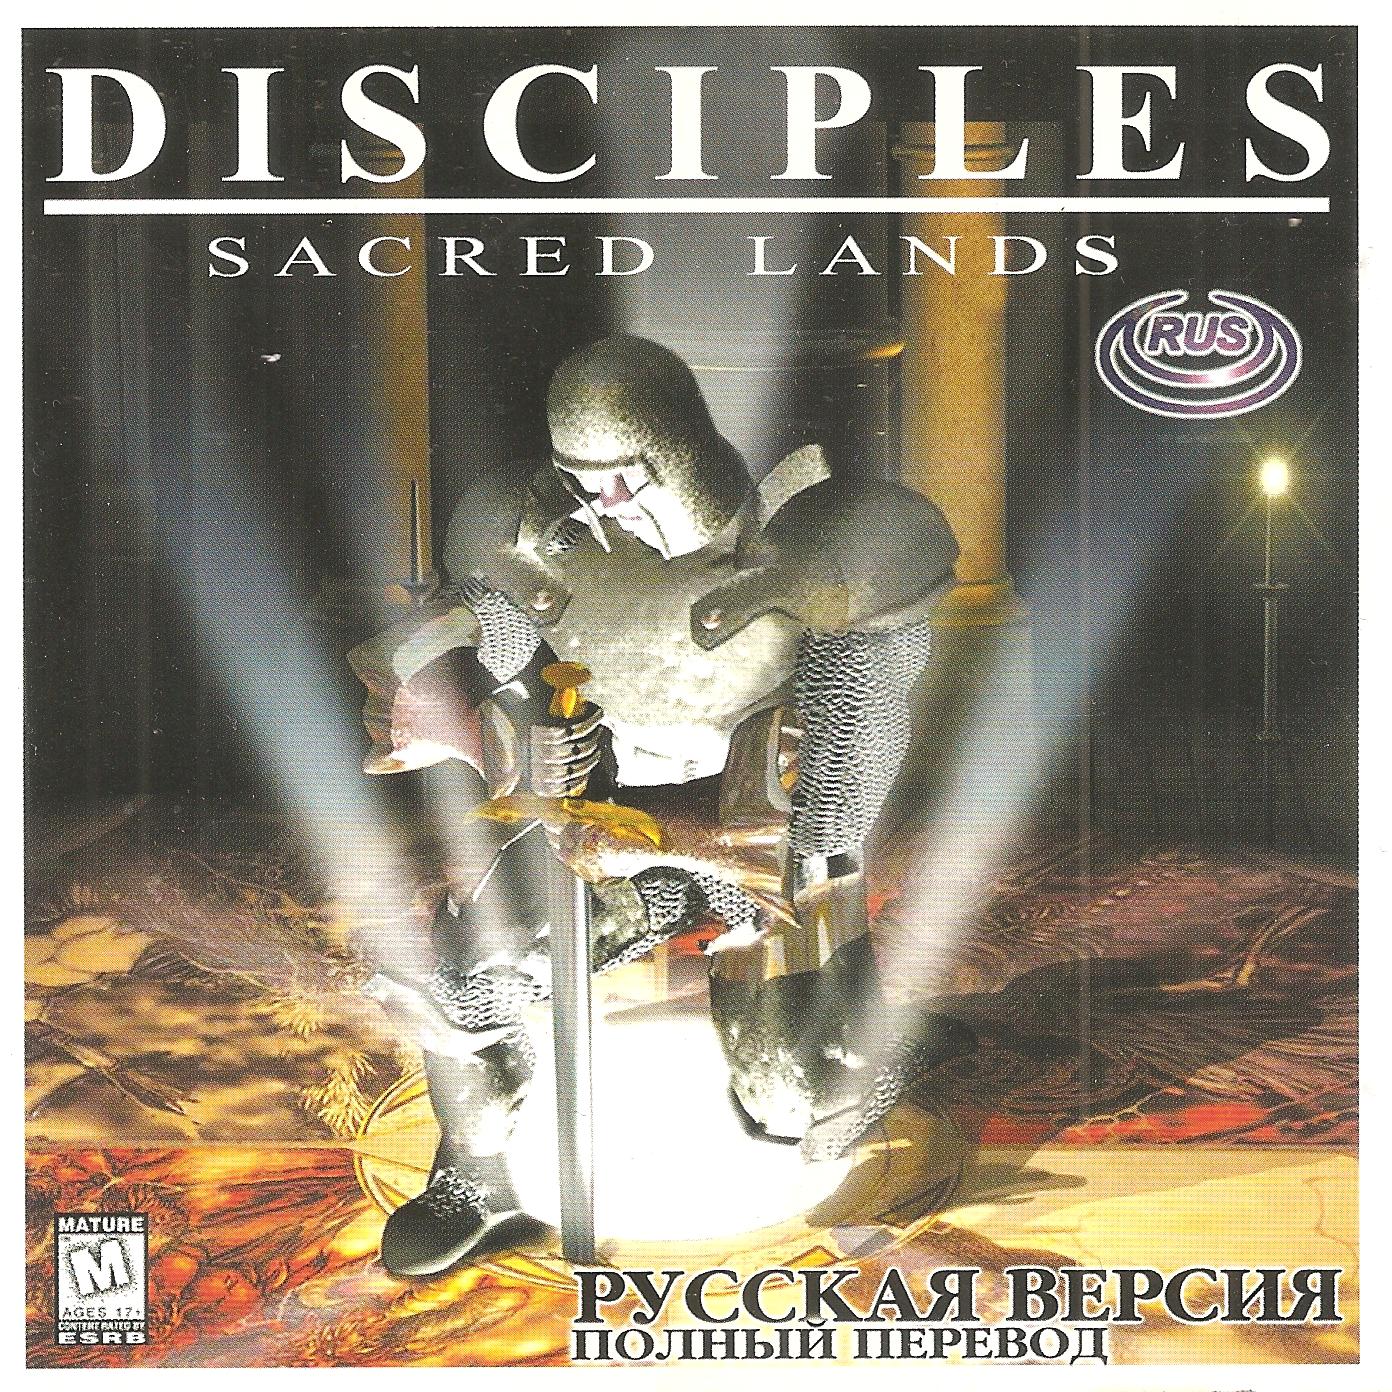 Disciples sacred lands steam фото 116